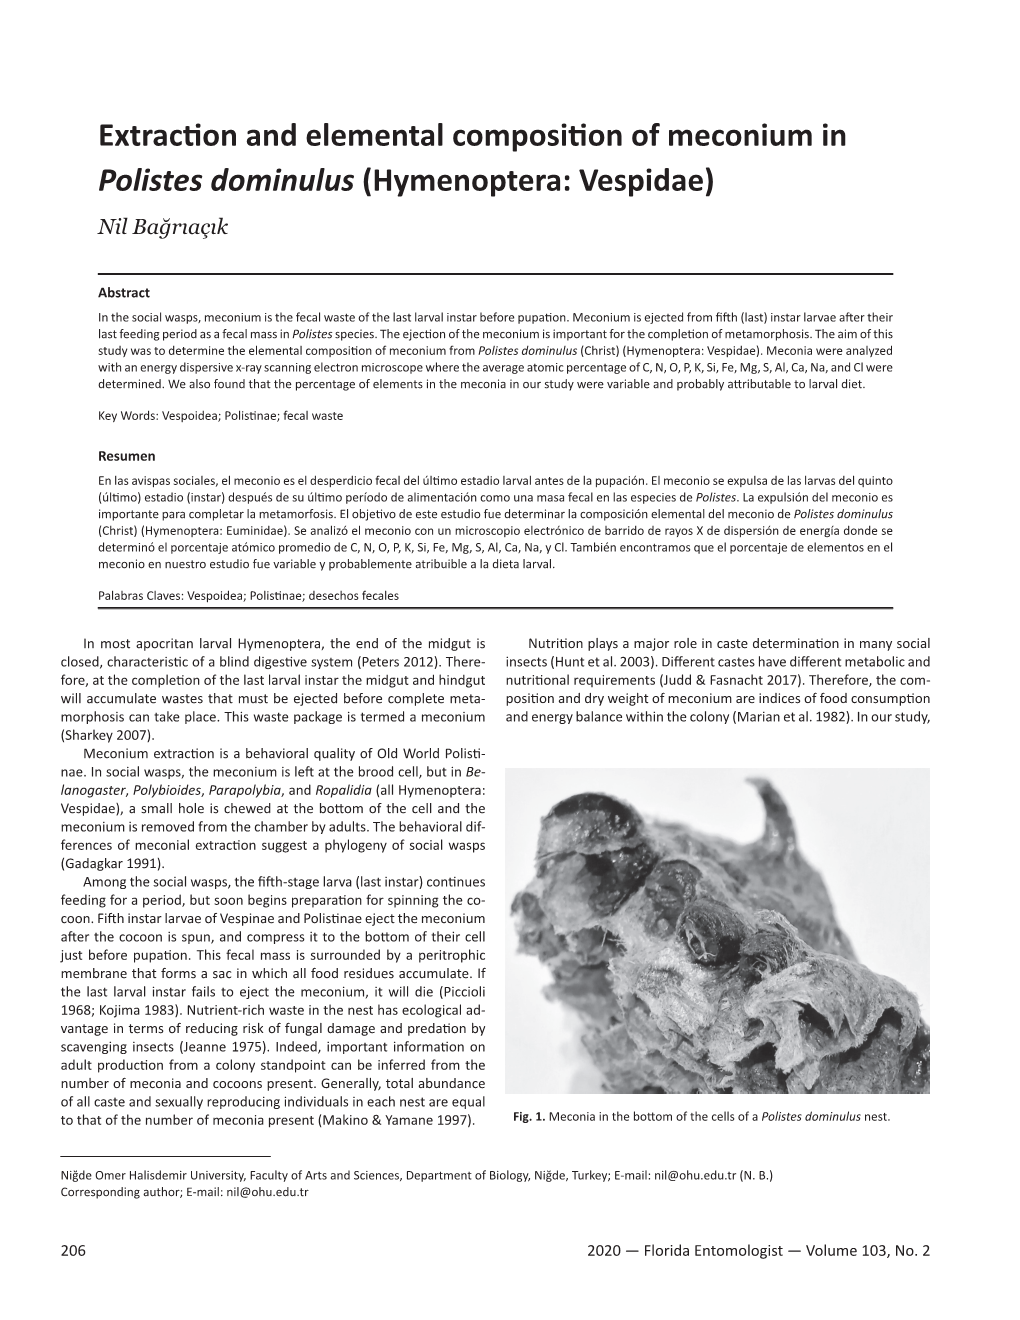 Extraction and Elemental Composition of Meconium in Polistes Dominulus (Hymenoptera: Vespidae)